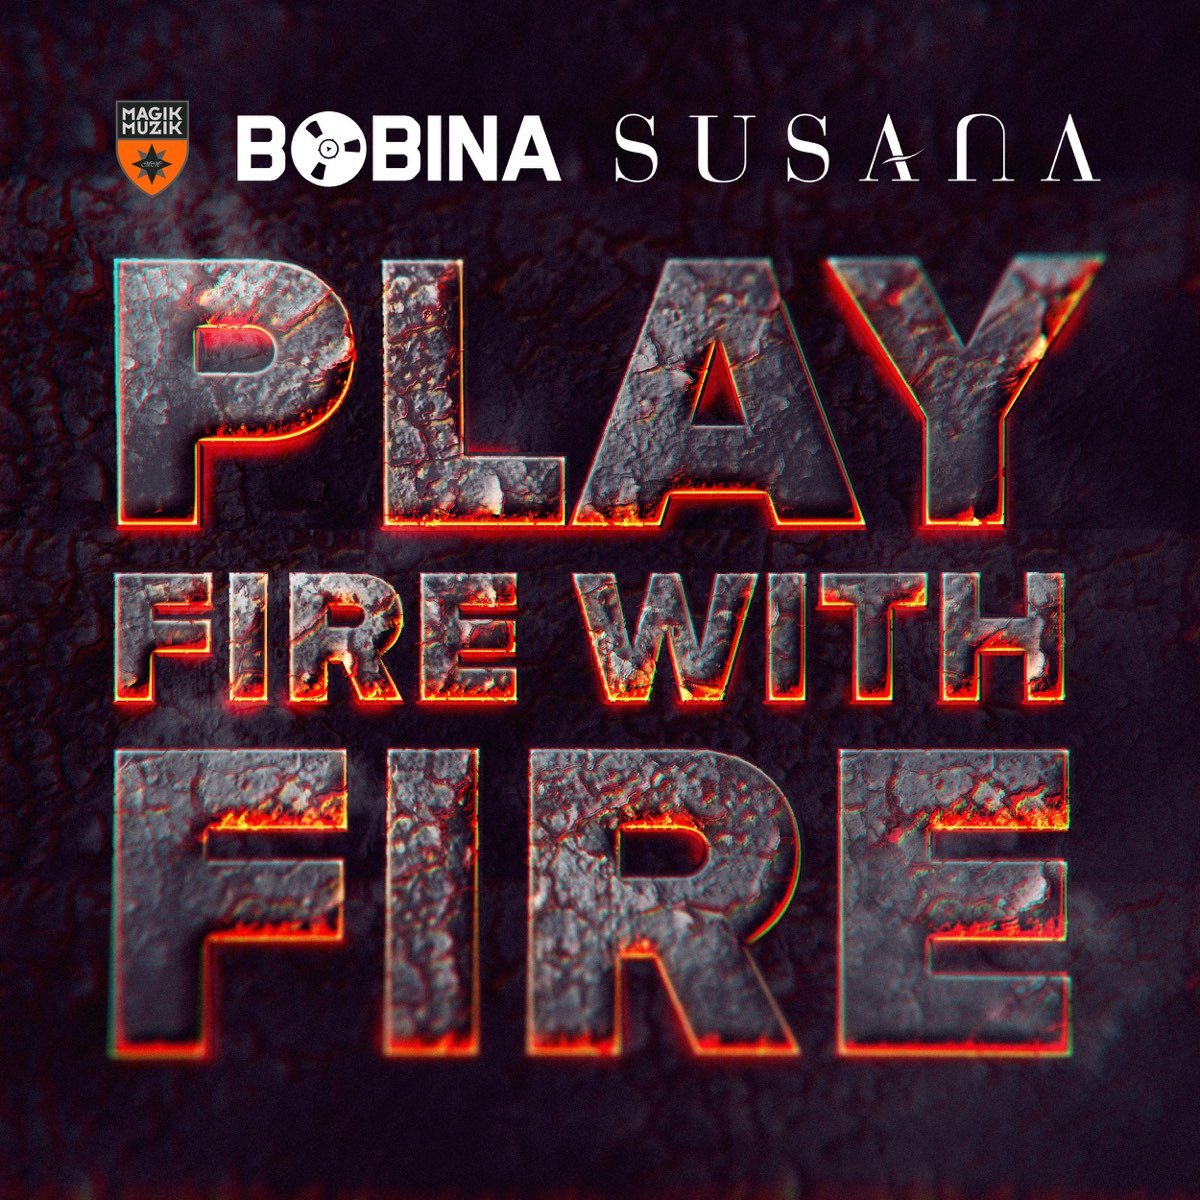 With Fire. Fire with Fire. Песня Play with Fire. Fire Play картинки.